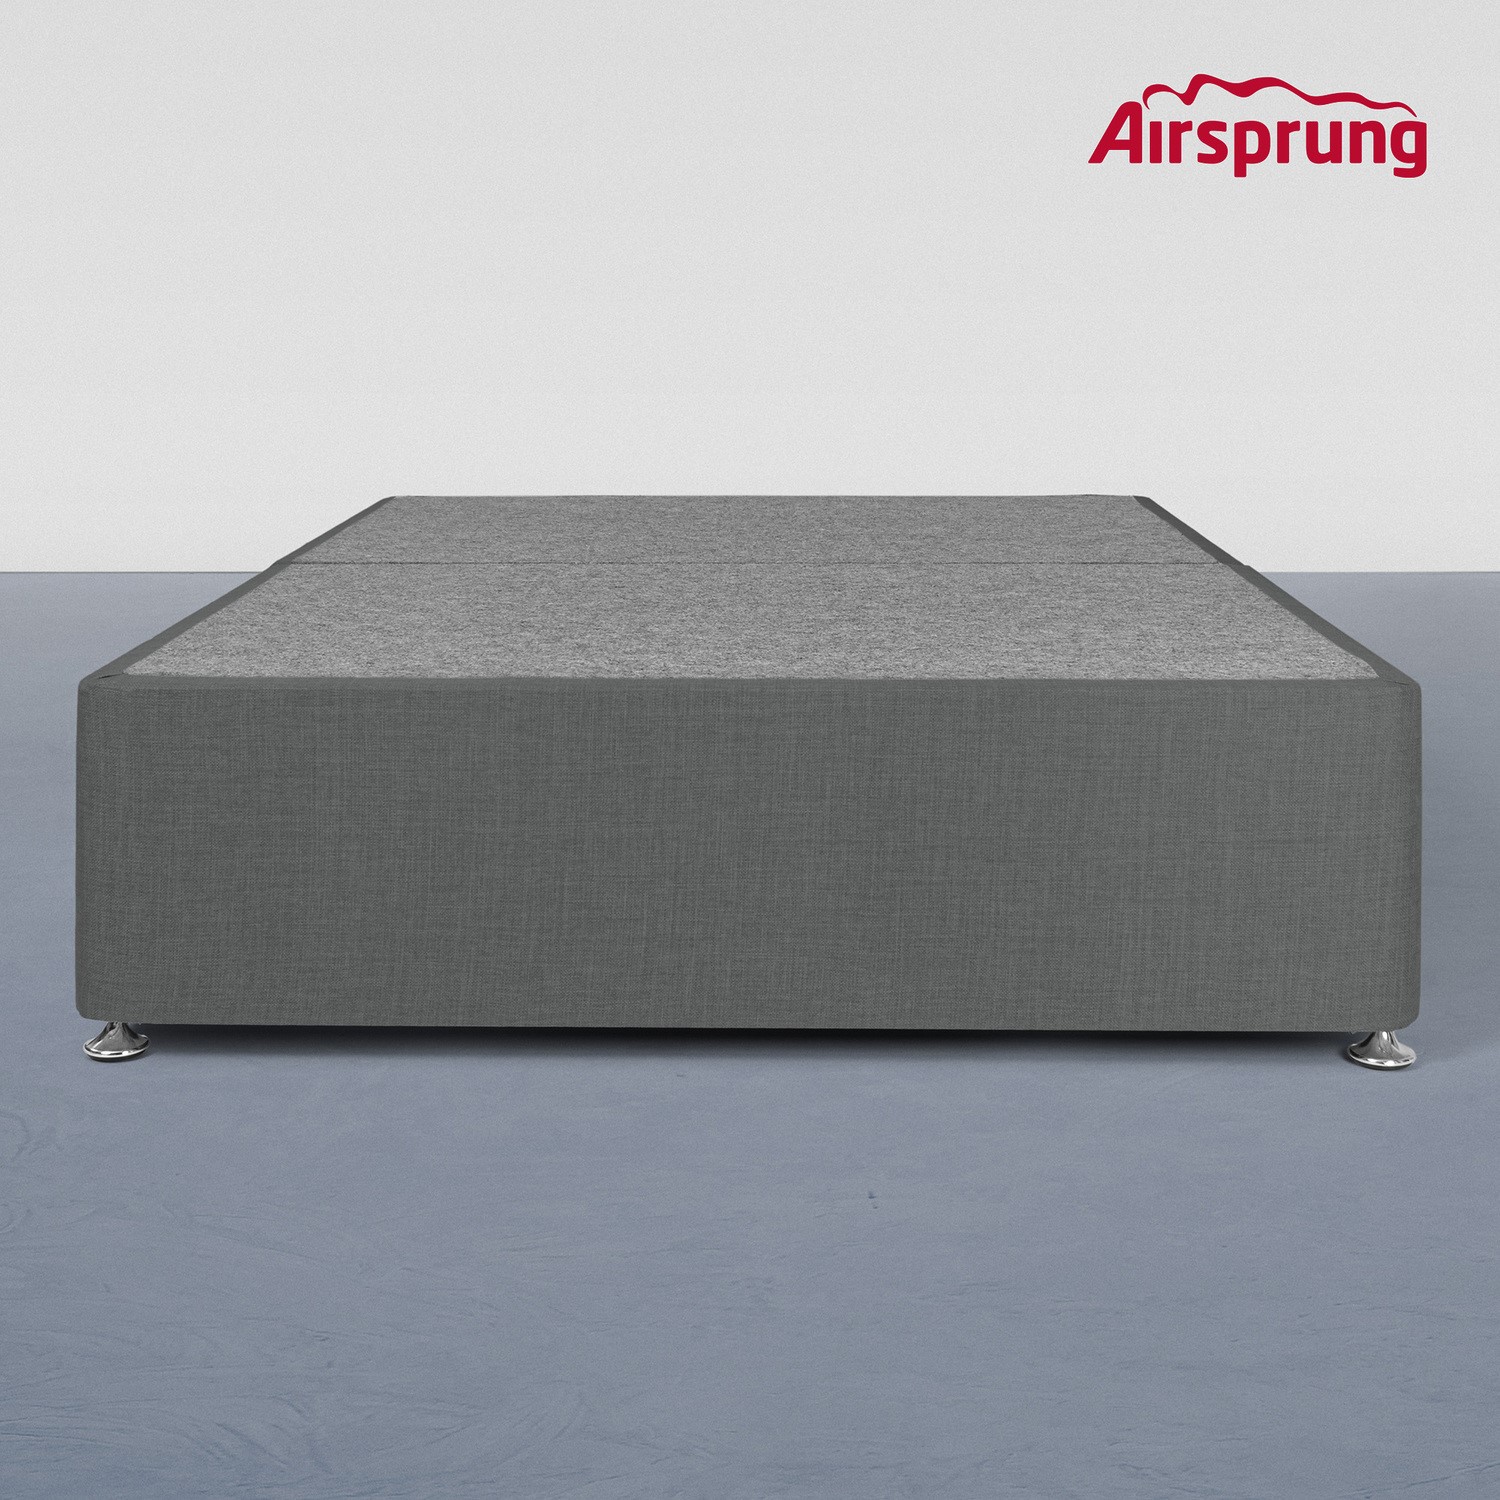 Read more about Airsprung kelston double 2 drawer divan charcoal